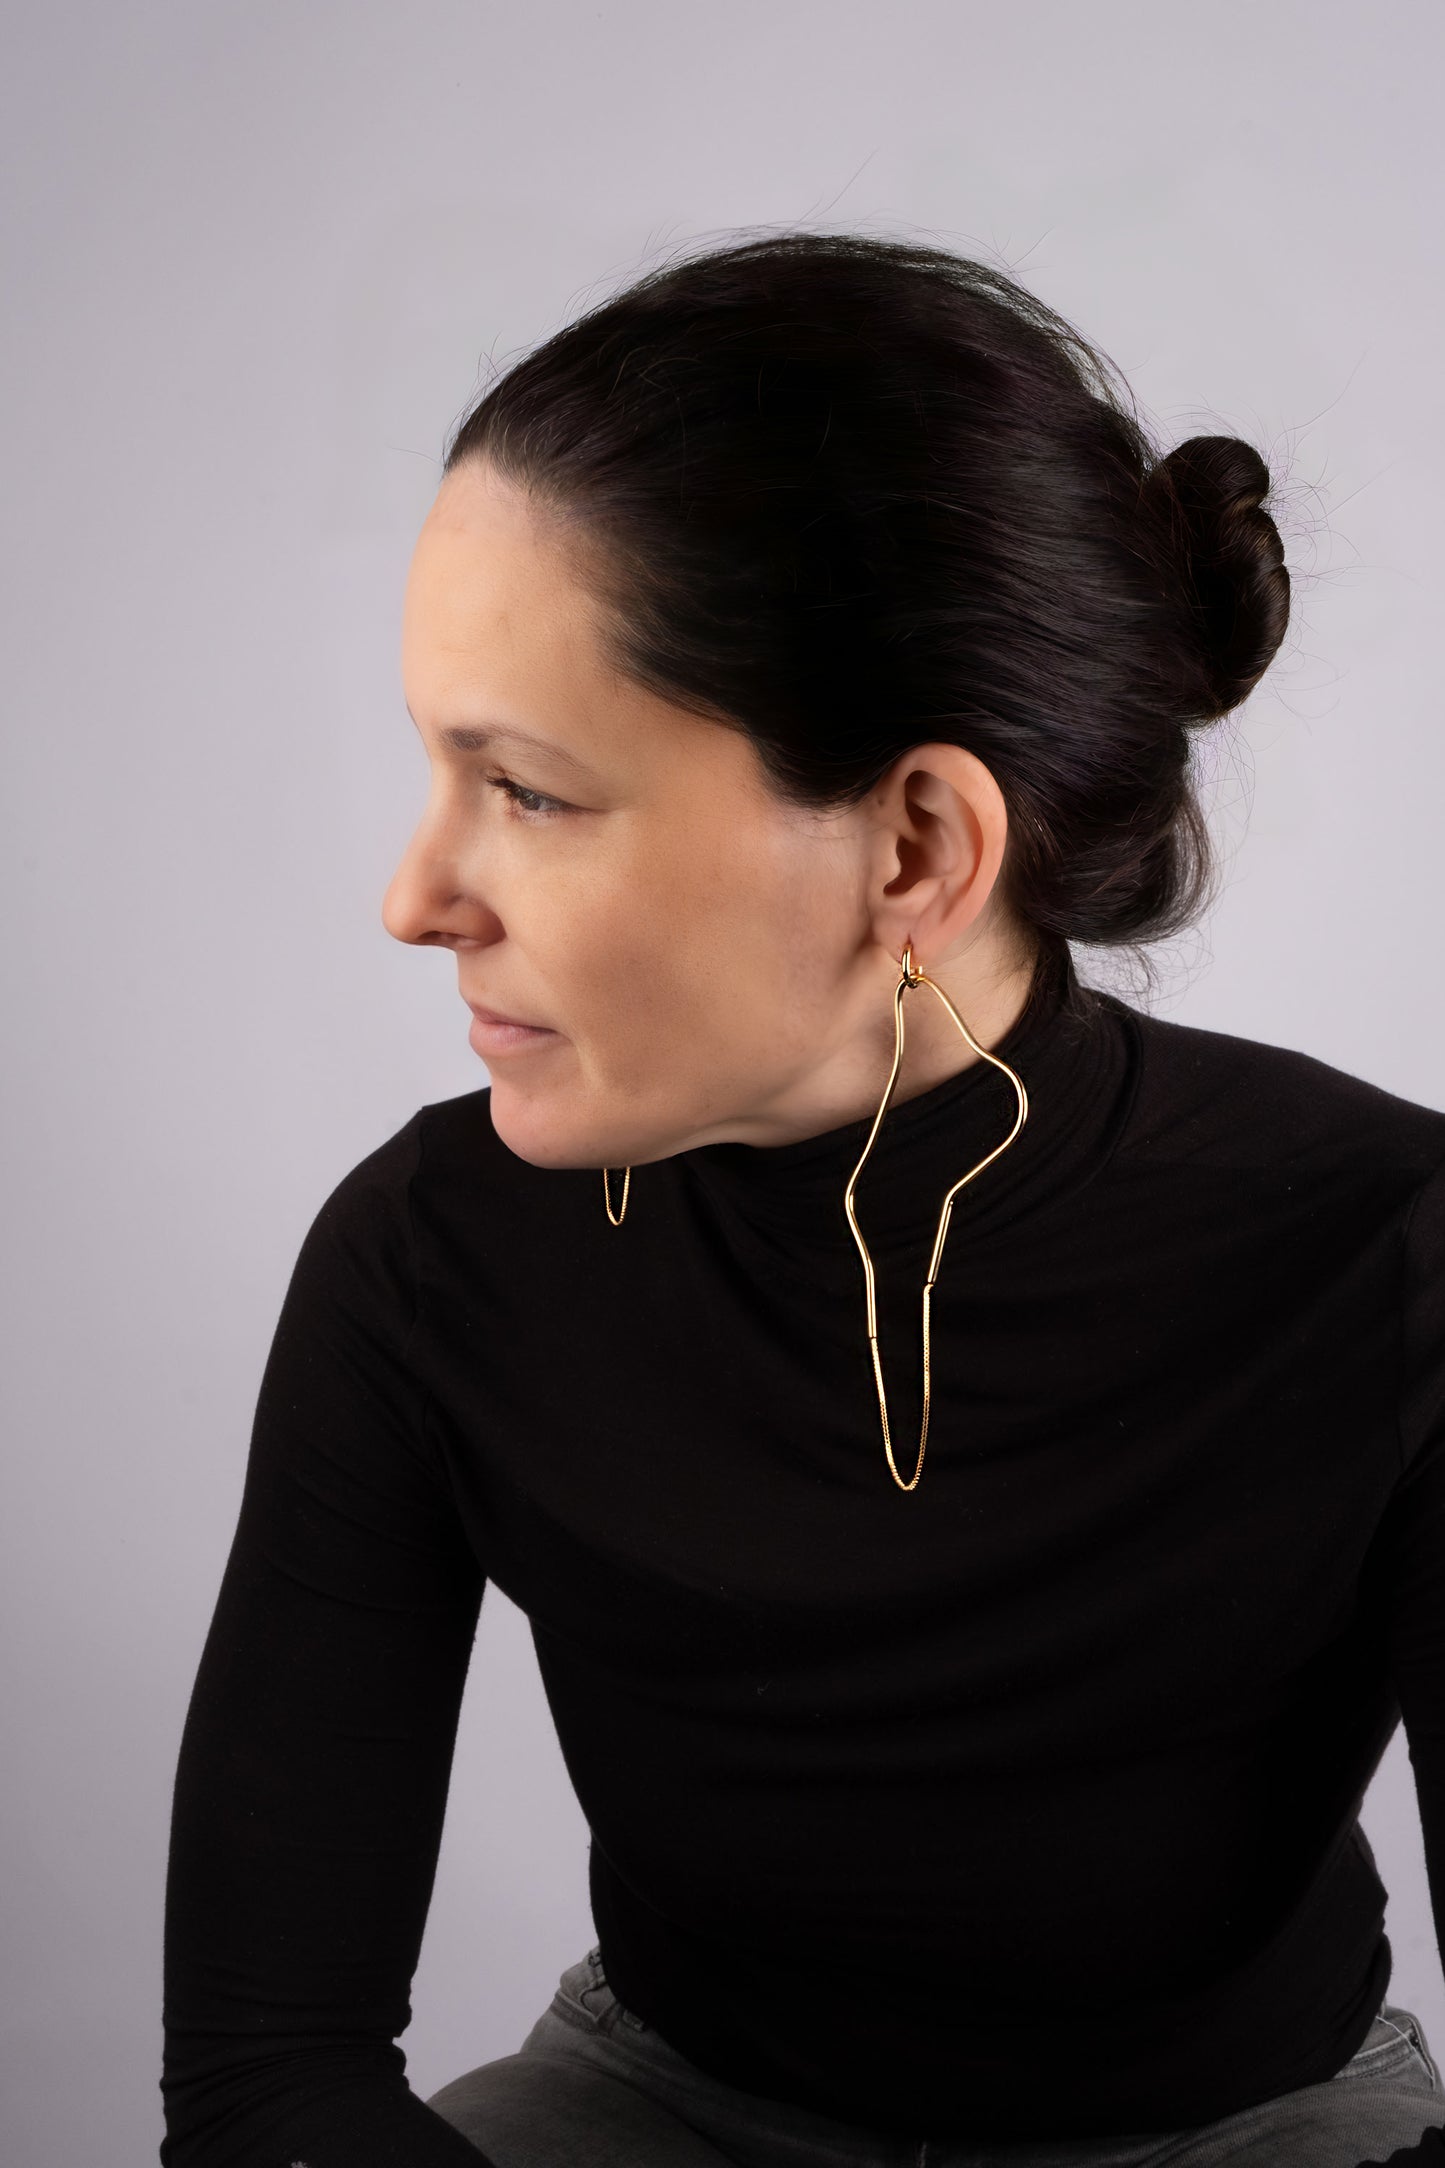 a woman wearing a black shirt and a pair of earrings